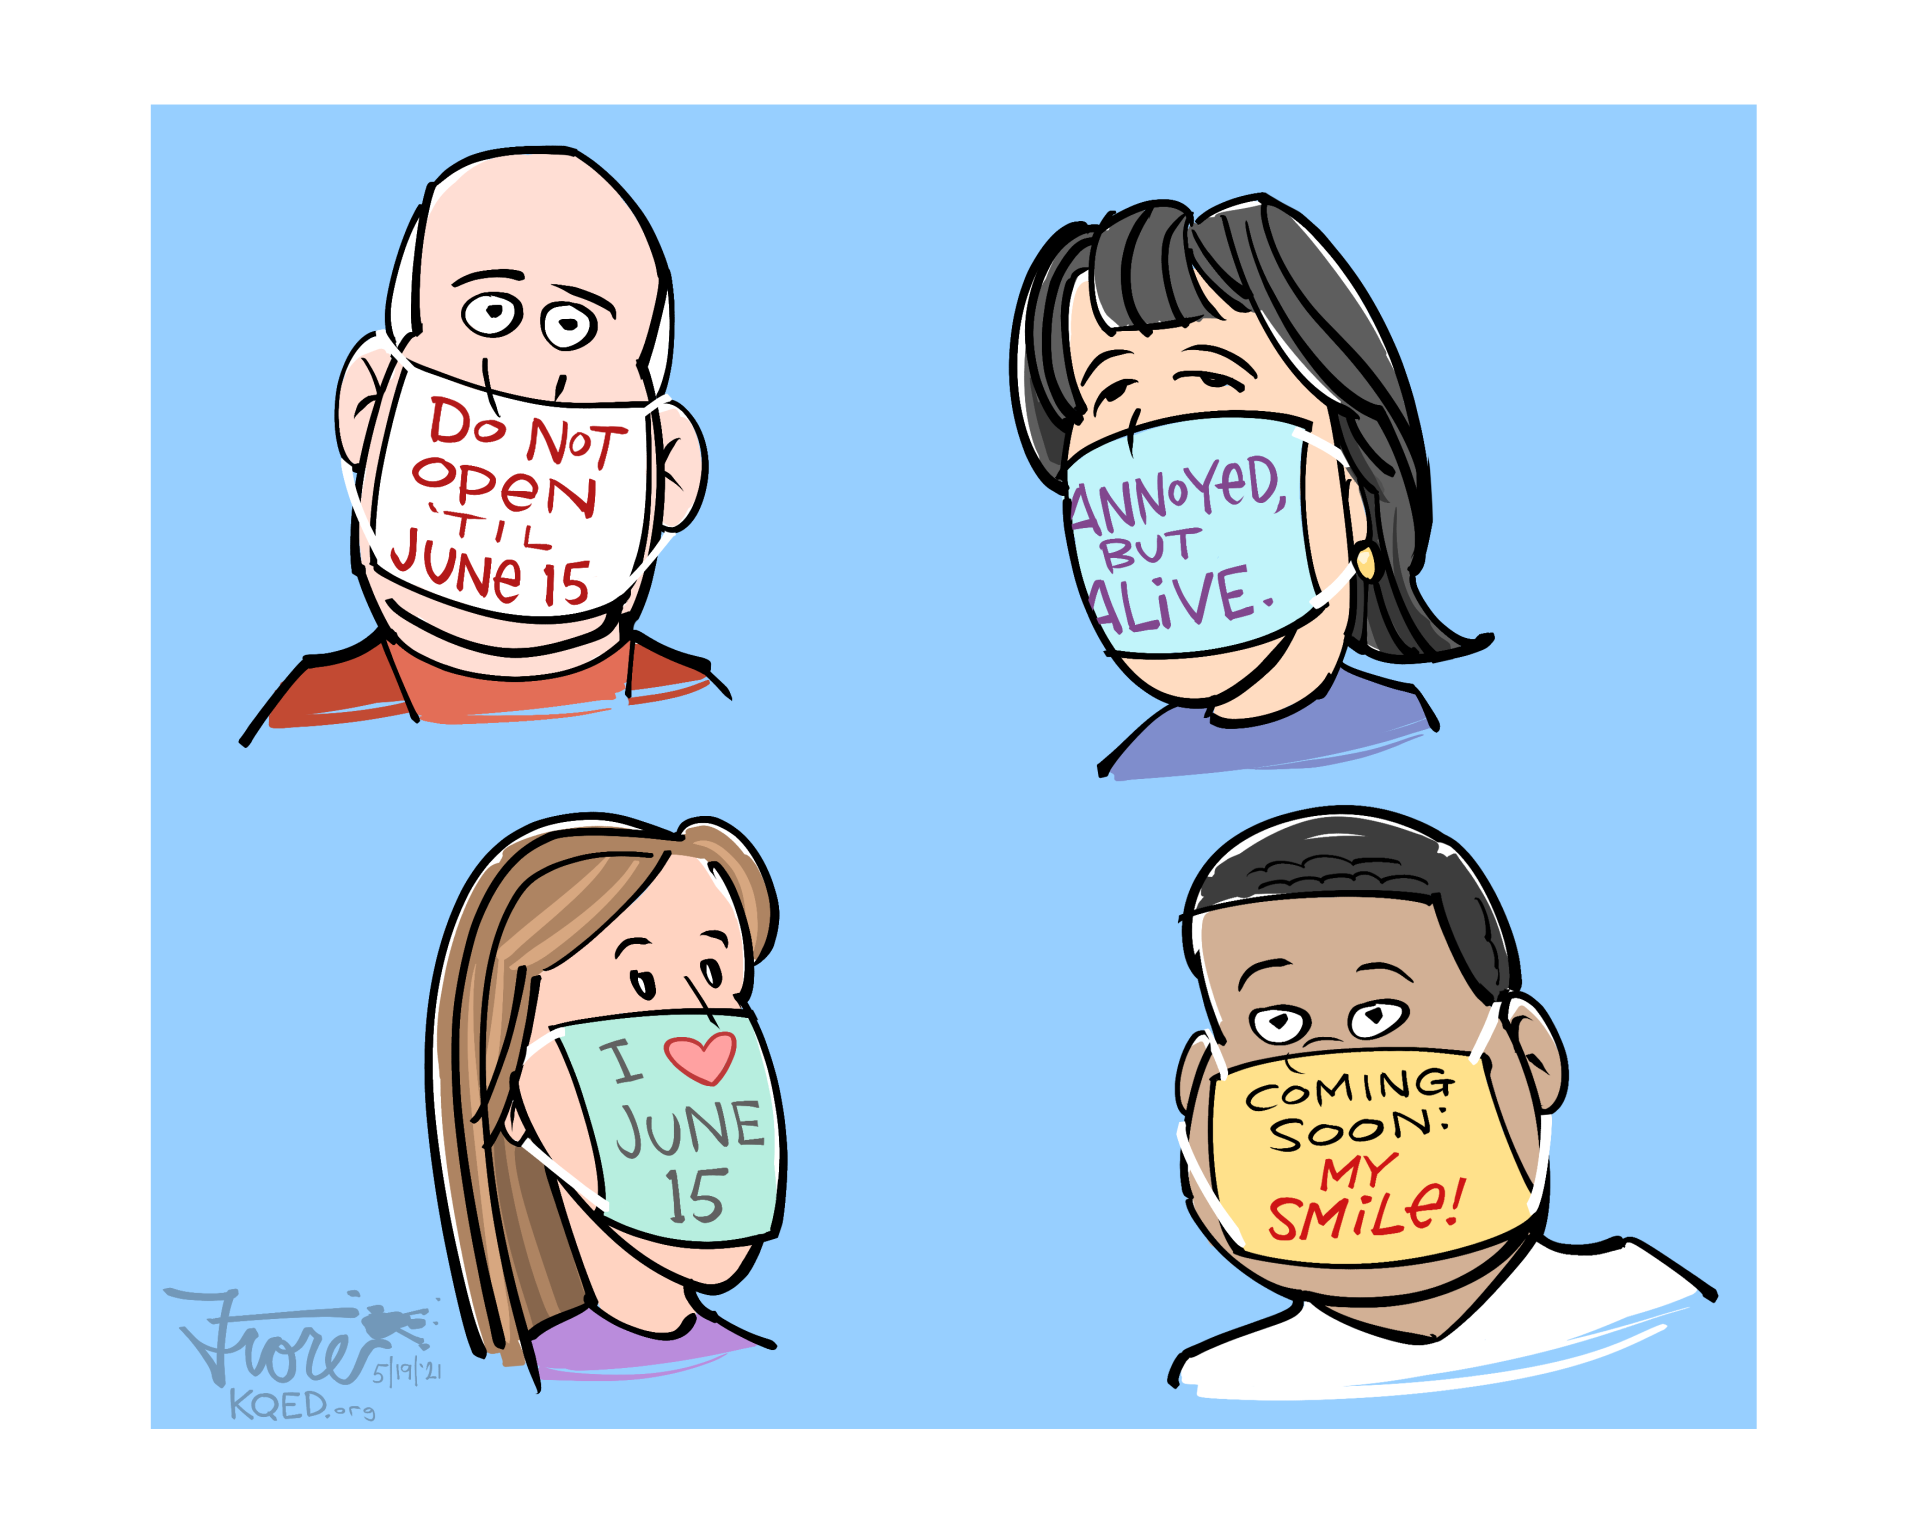 A Mark Fiore cartoon about the June 15 date that vaccinated Californians will no longer be required to wear face masks. Four characters in the cartoons wear masks that read: Do not open 'til June 15, annoyed but alive, I (heart) June 15 and coming soon: my smile!